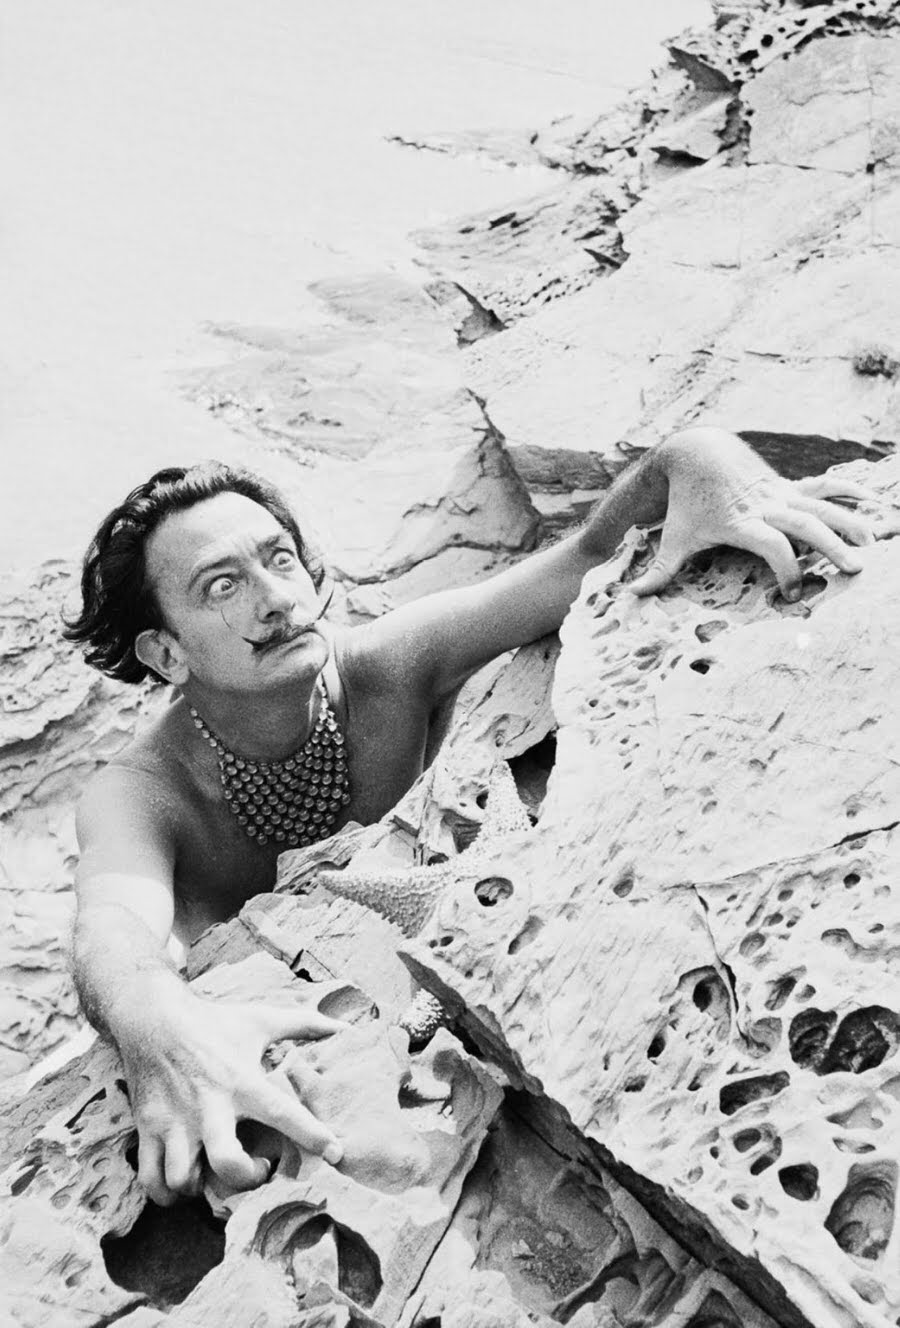 One day with Salvador Dalí: Surreal Photo Shoot of the Spanish Artist in his Seaside Villa, 1955